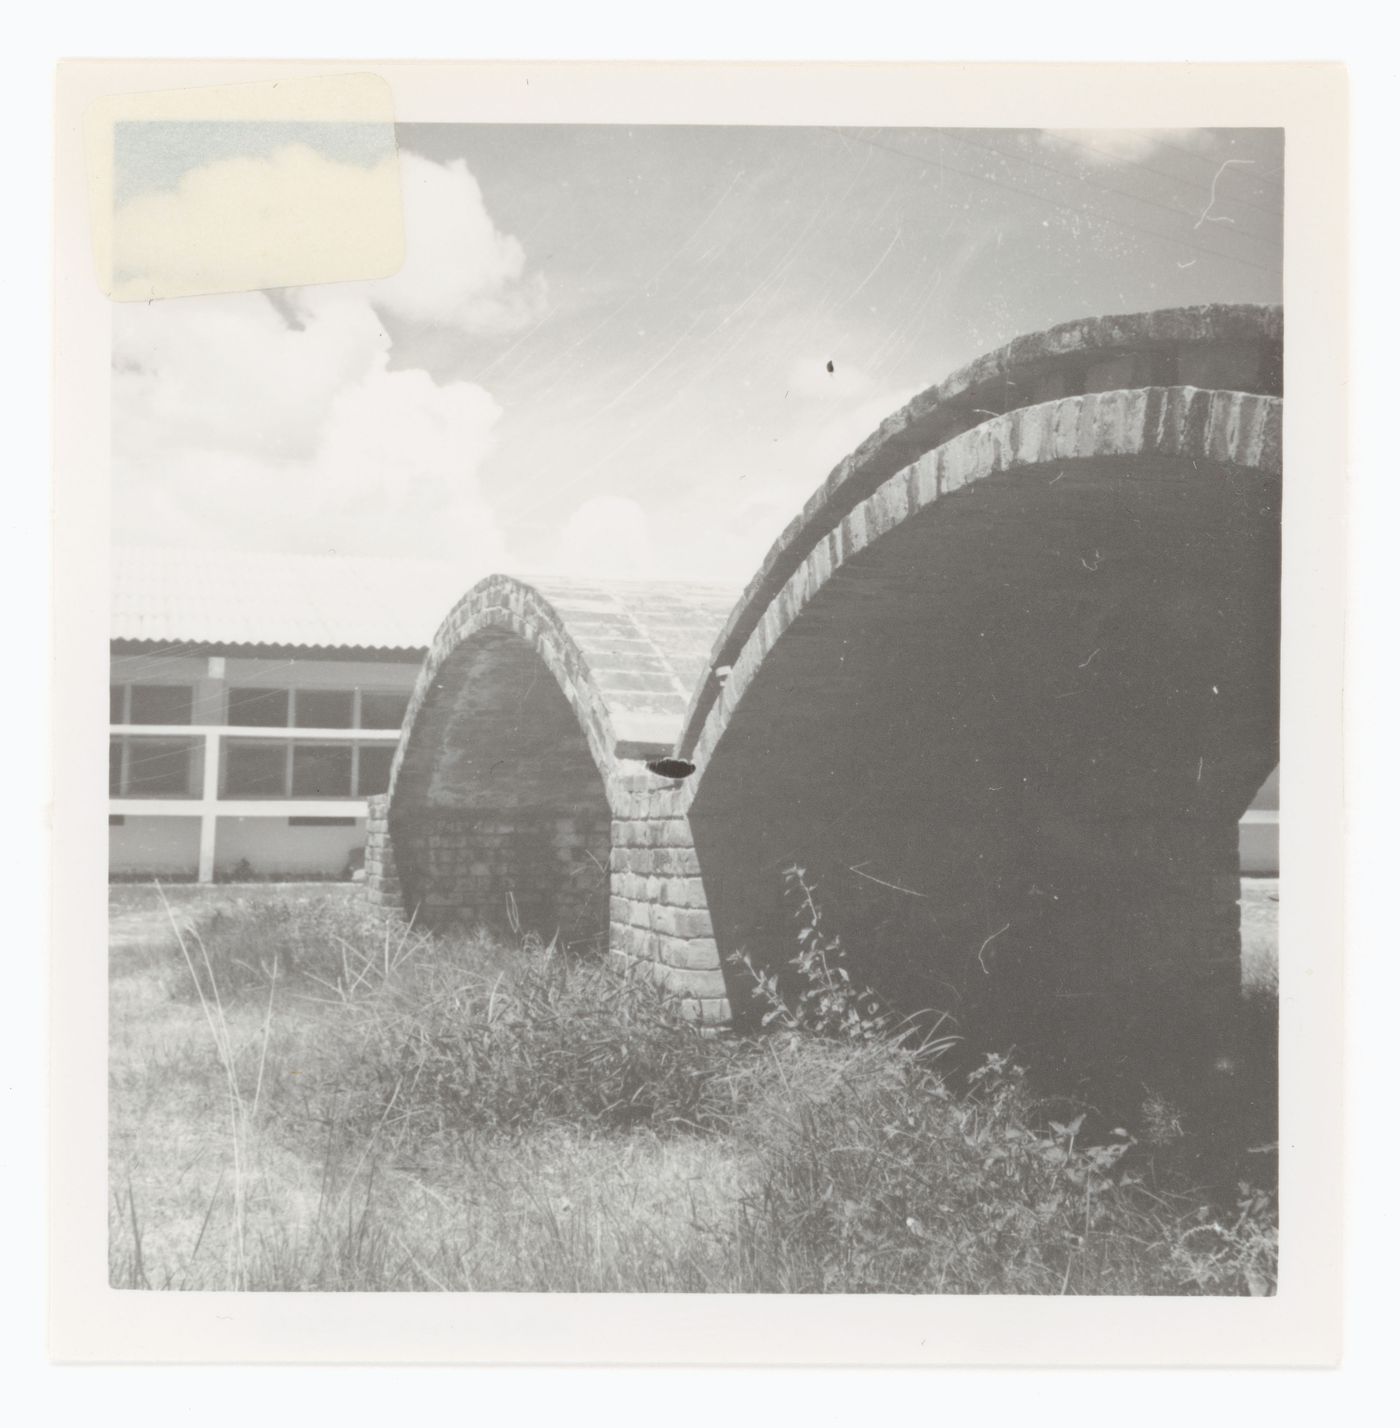 Partial view of an unidentified structure with arches, possibly in Chandigarh, India